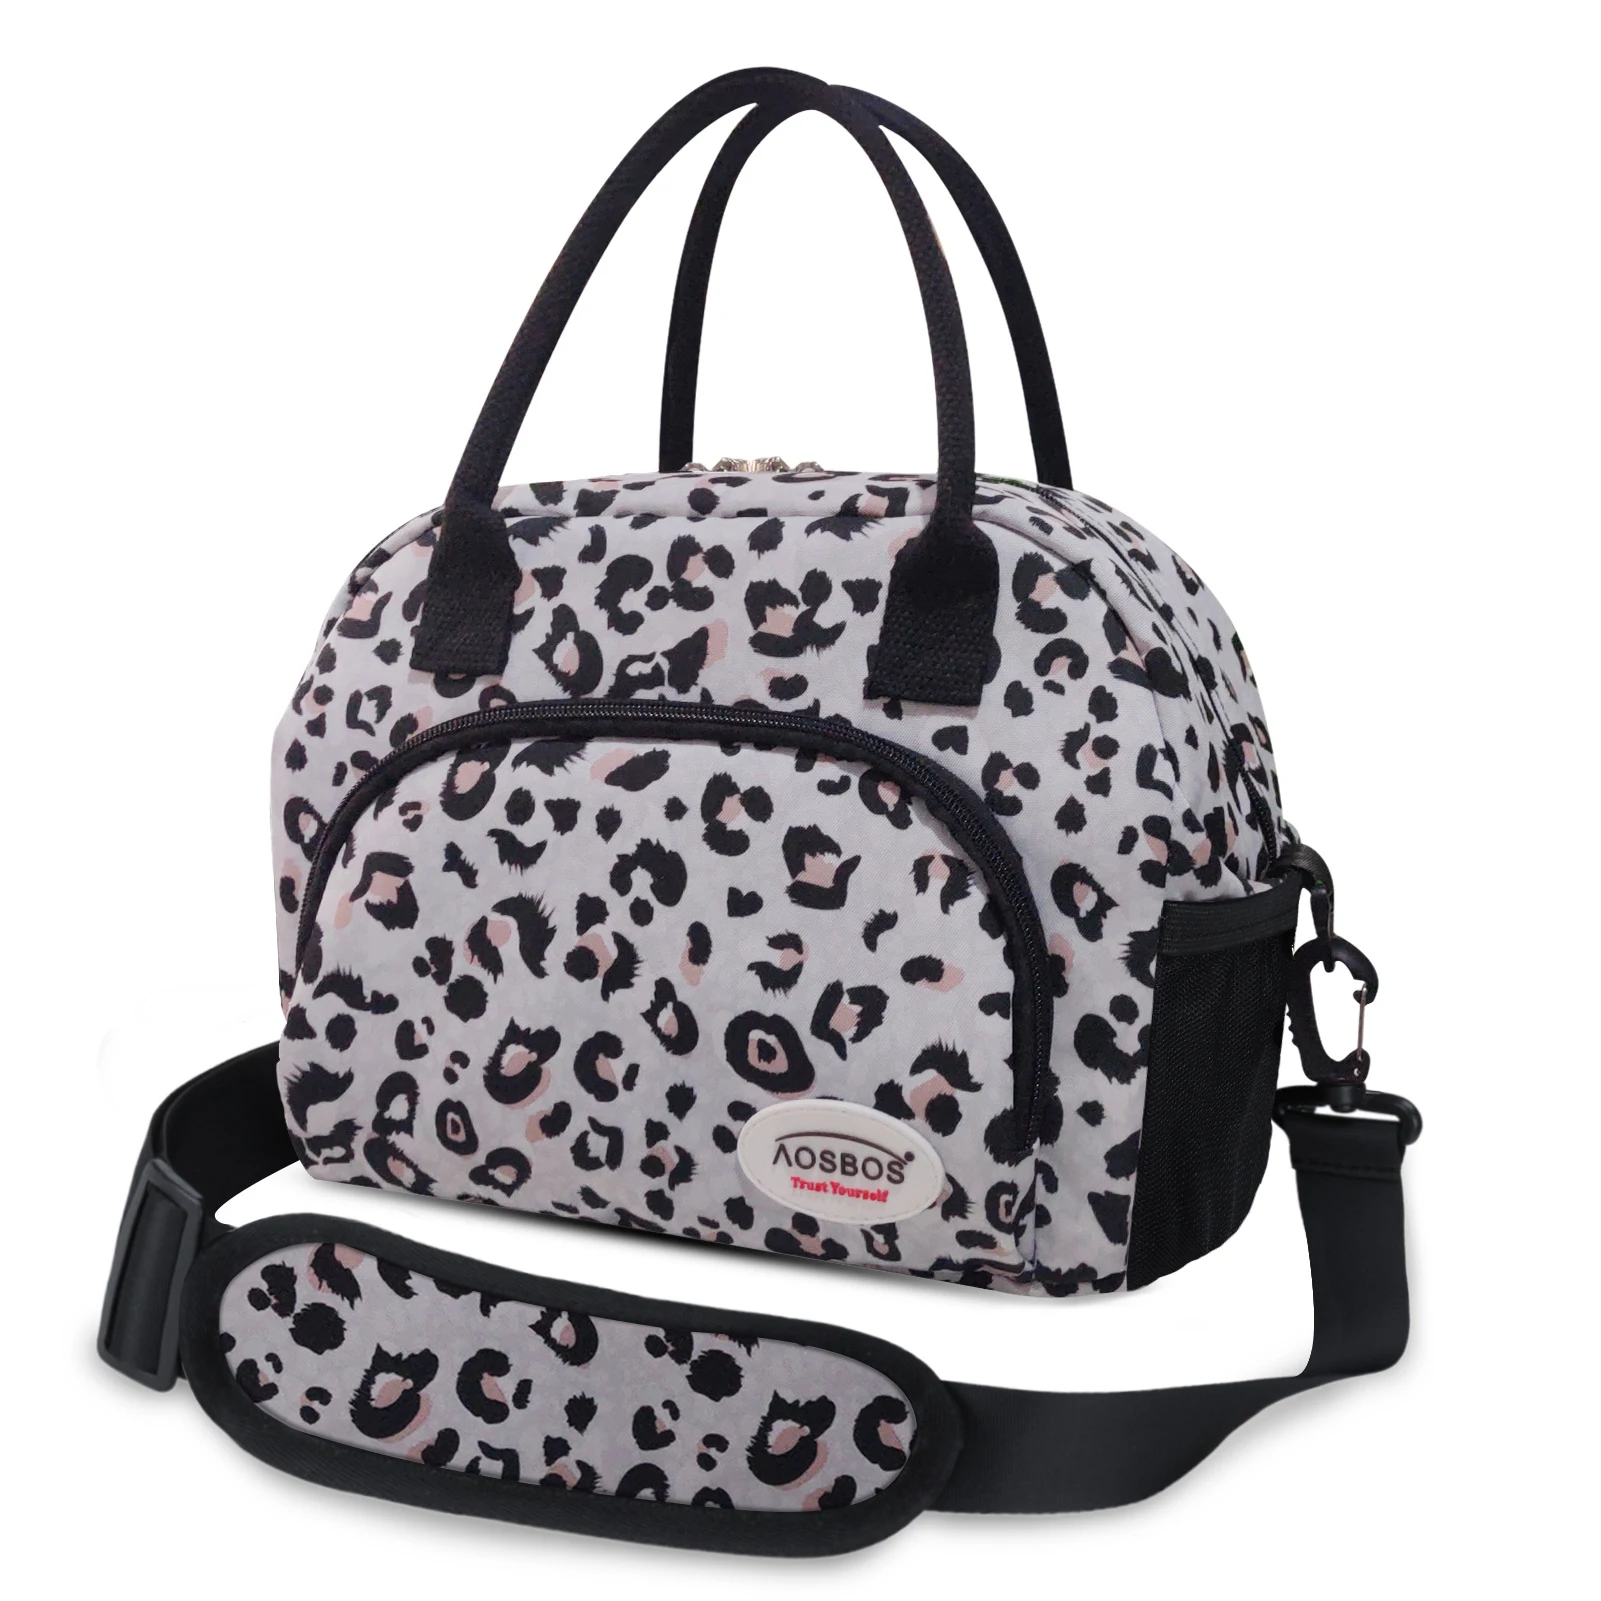 

Aosbos Leopard Print Lunch Bag Fashion Canvas Portable Cooler Thermal Insulated Food Bag Picnic Lunch Box Bag for Men Women Kids